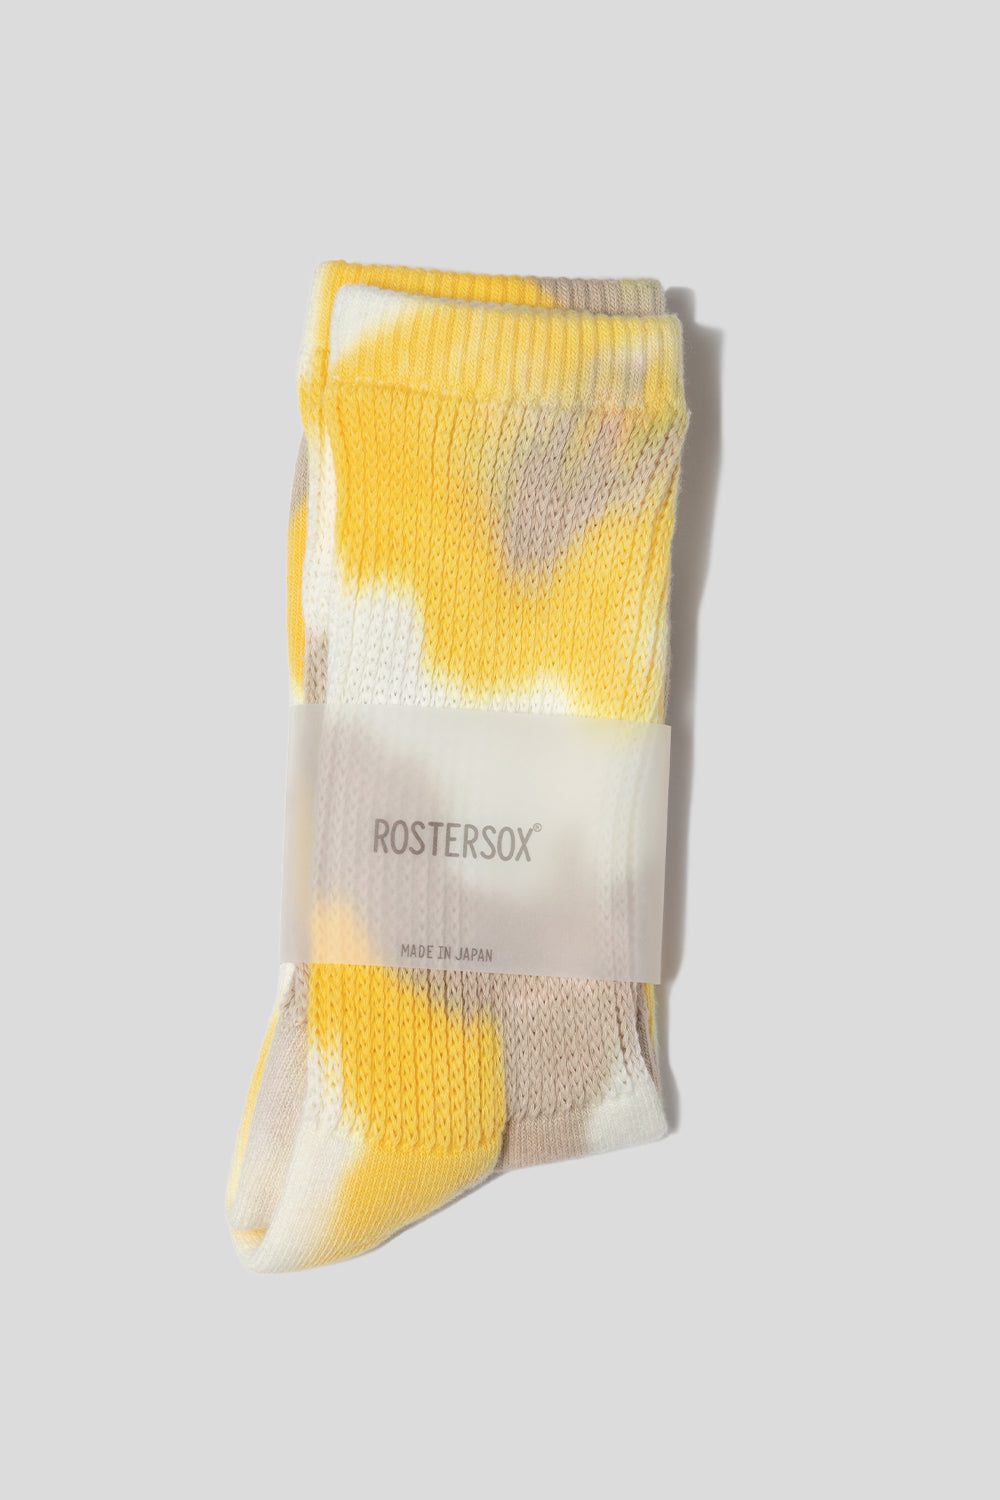 Rostersox TD Socks in Yellow